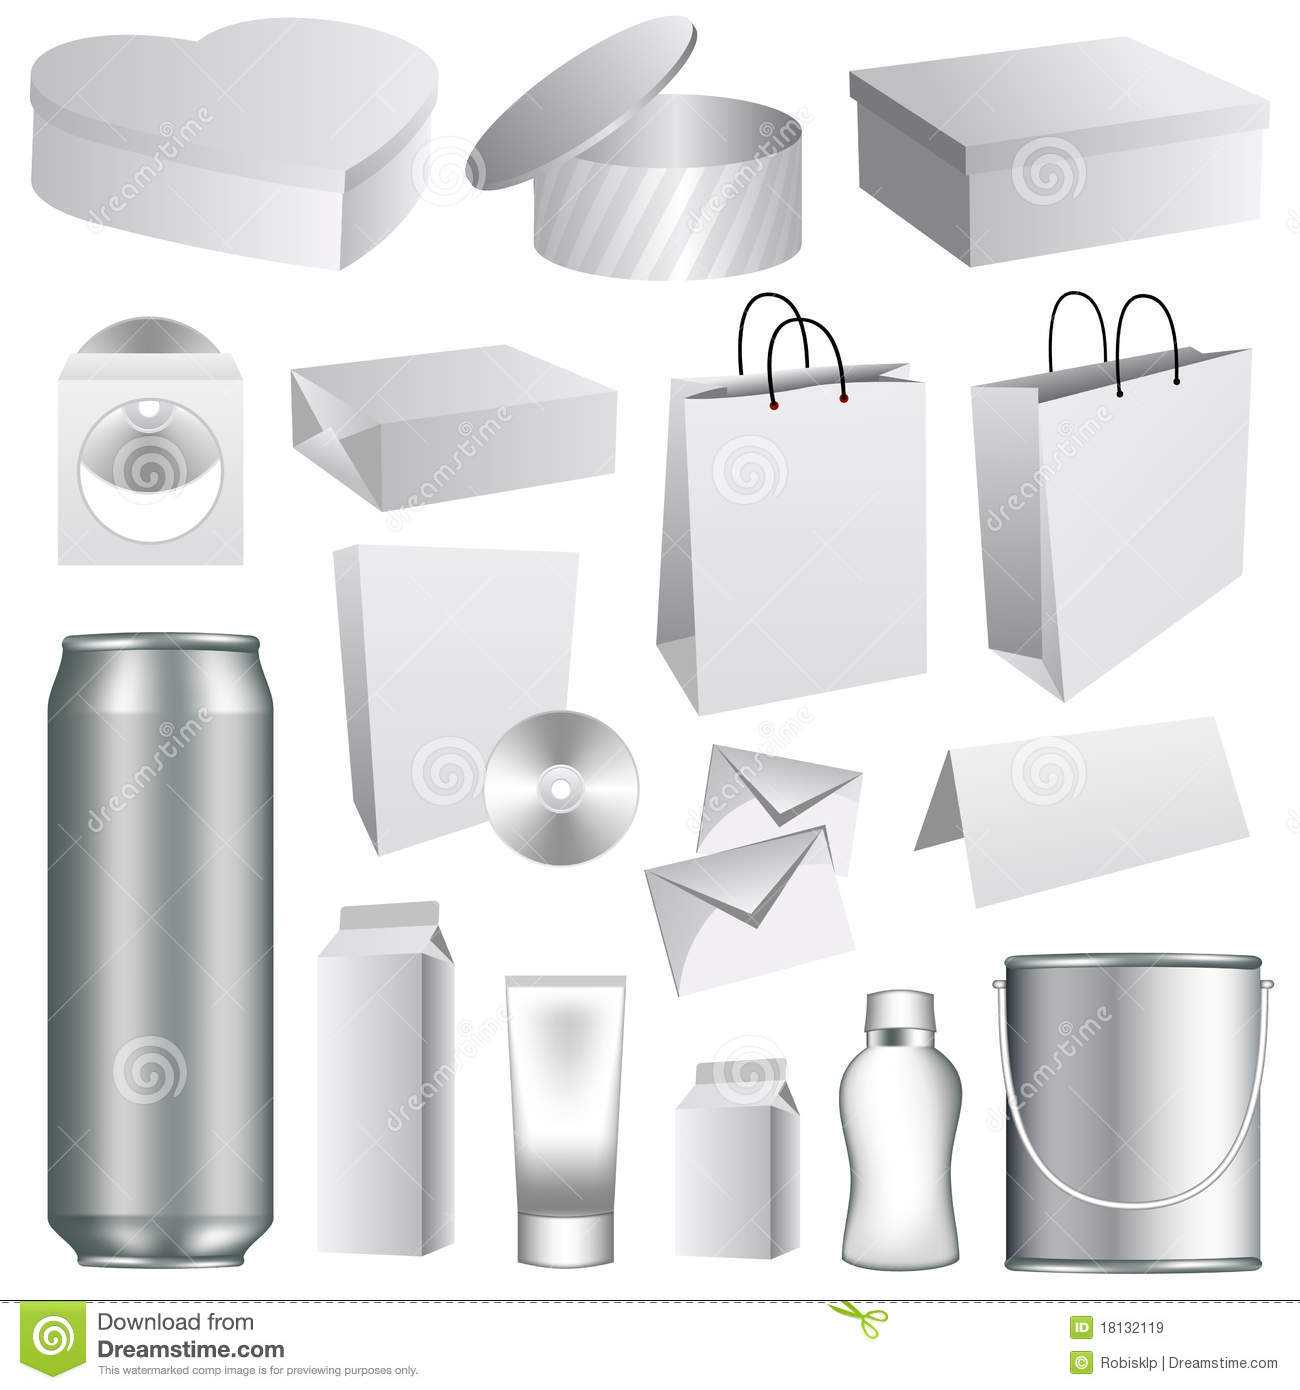 Blank Packaging Templates Stock Vector. Illustration Of Intended For Blank Packaging Templates